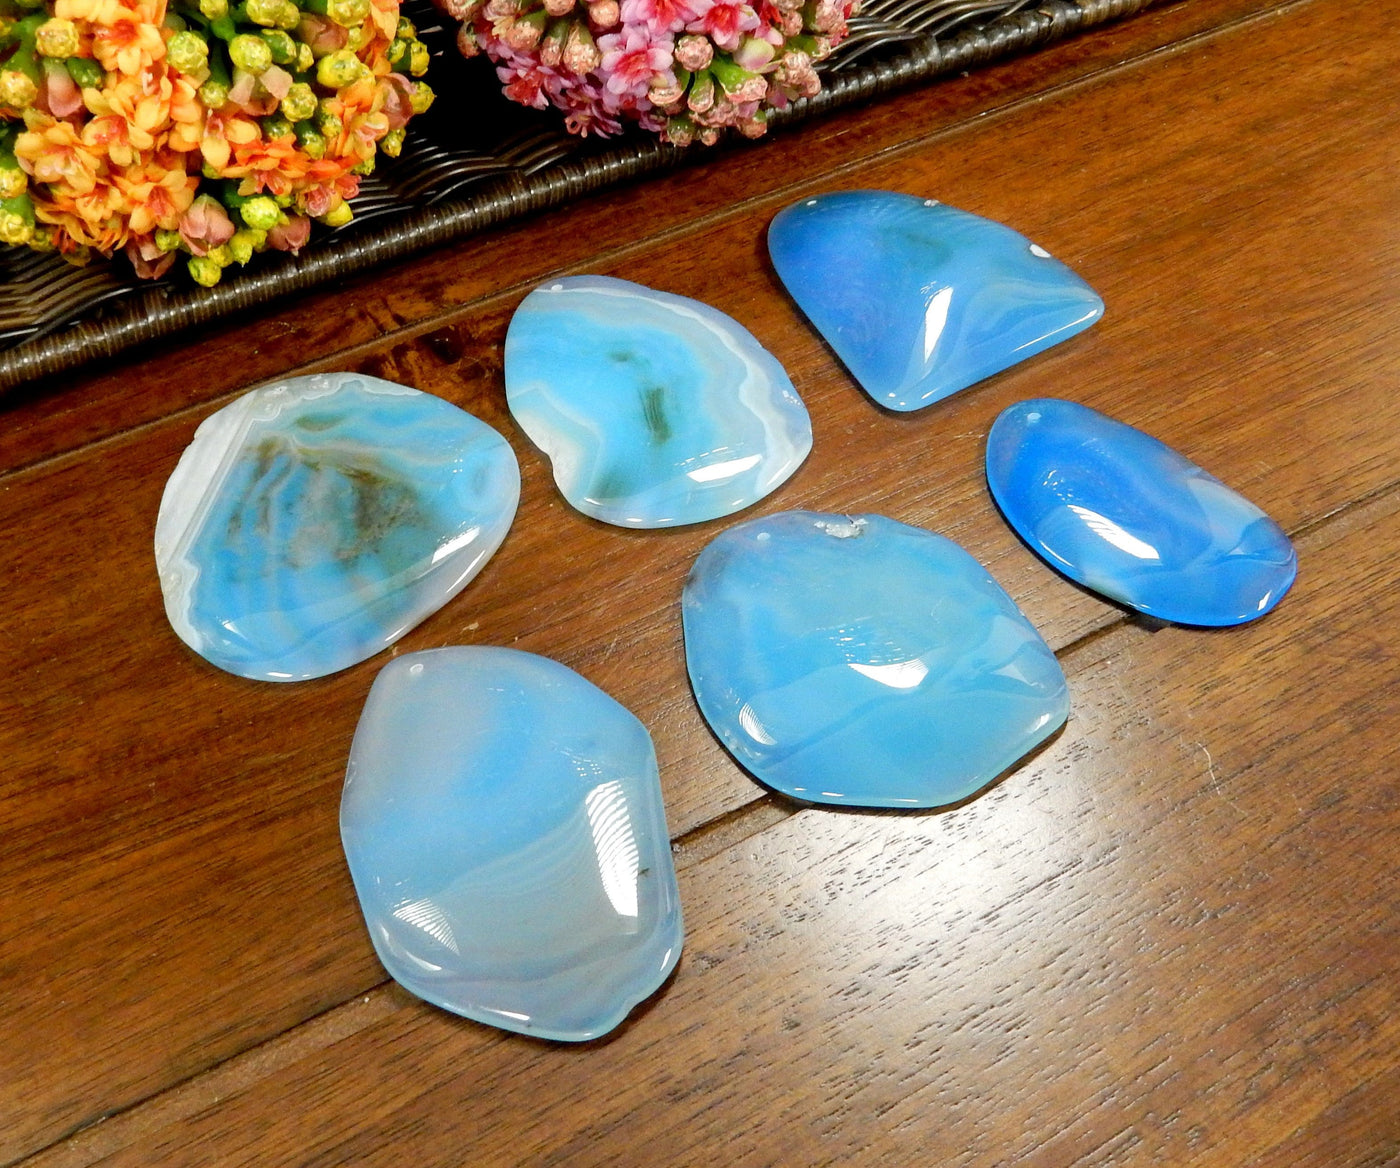 Side Angle 6 Light Blue FreeForm Agate Slices with Polished Edge on Wooden Background.